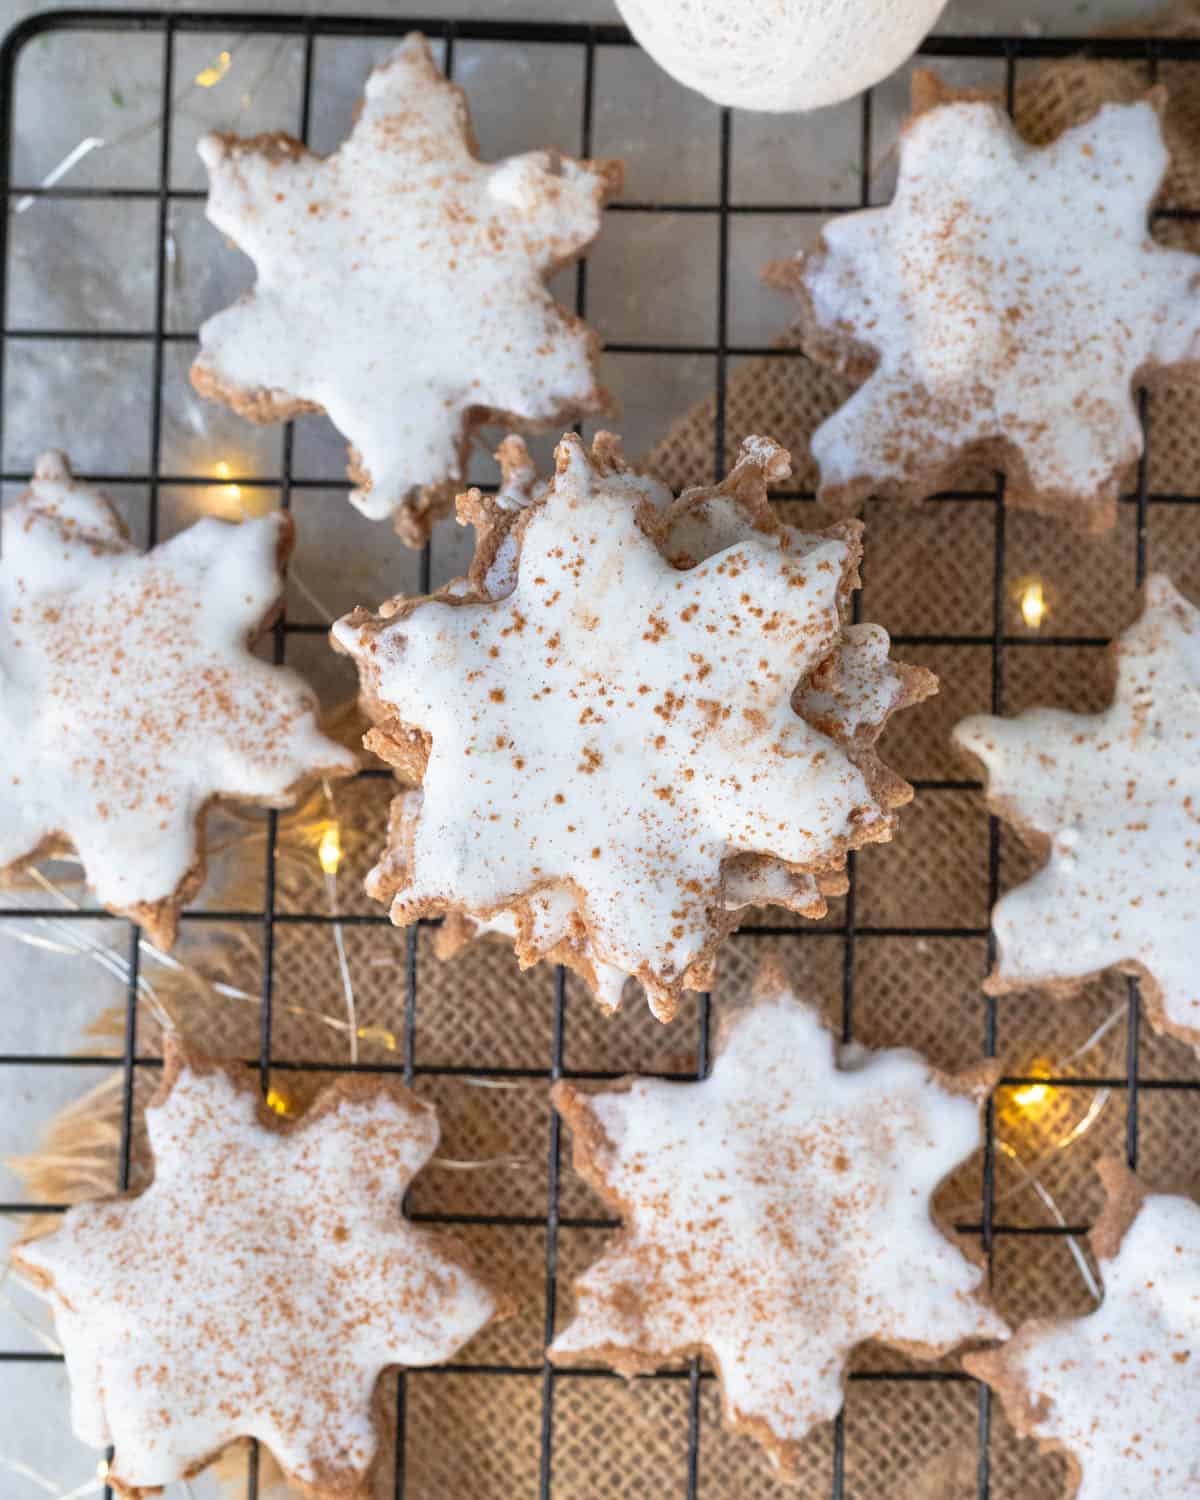 A close-up of the vegan Zimtsterne cookies, focusing on the texture and white glaze, with a sprinkle of cinnamon adding a touch of Swiss Christmas charm.